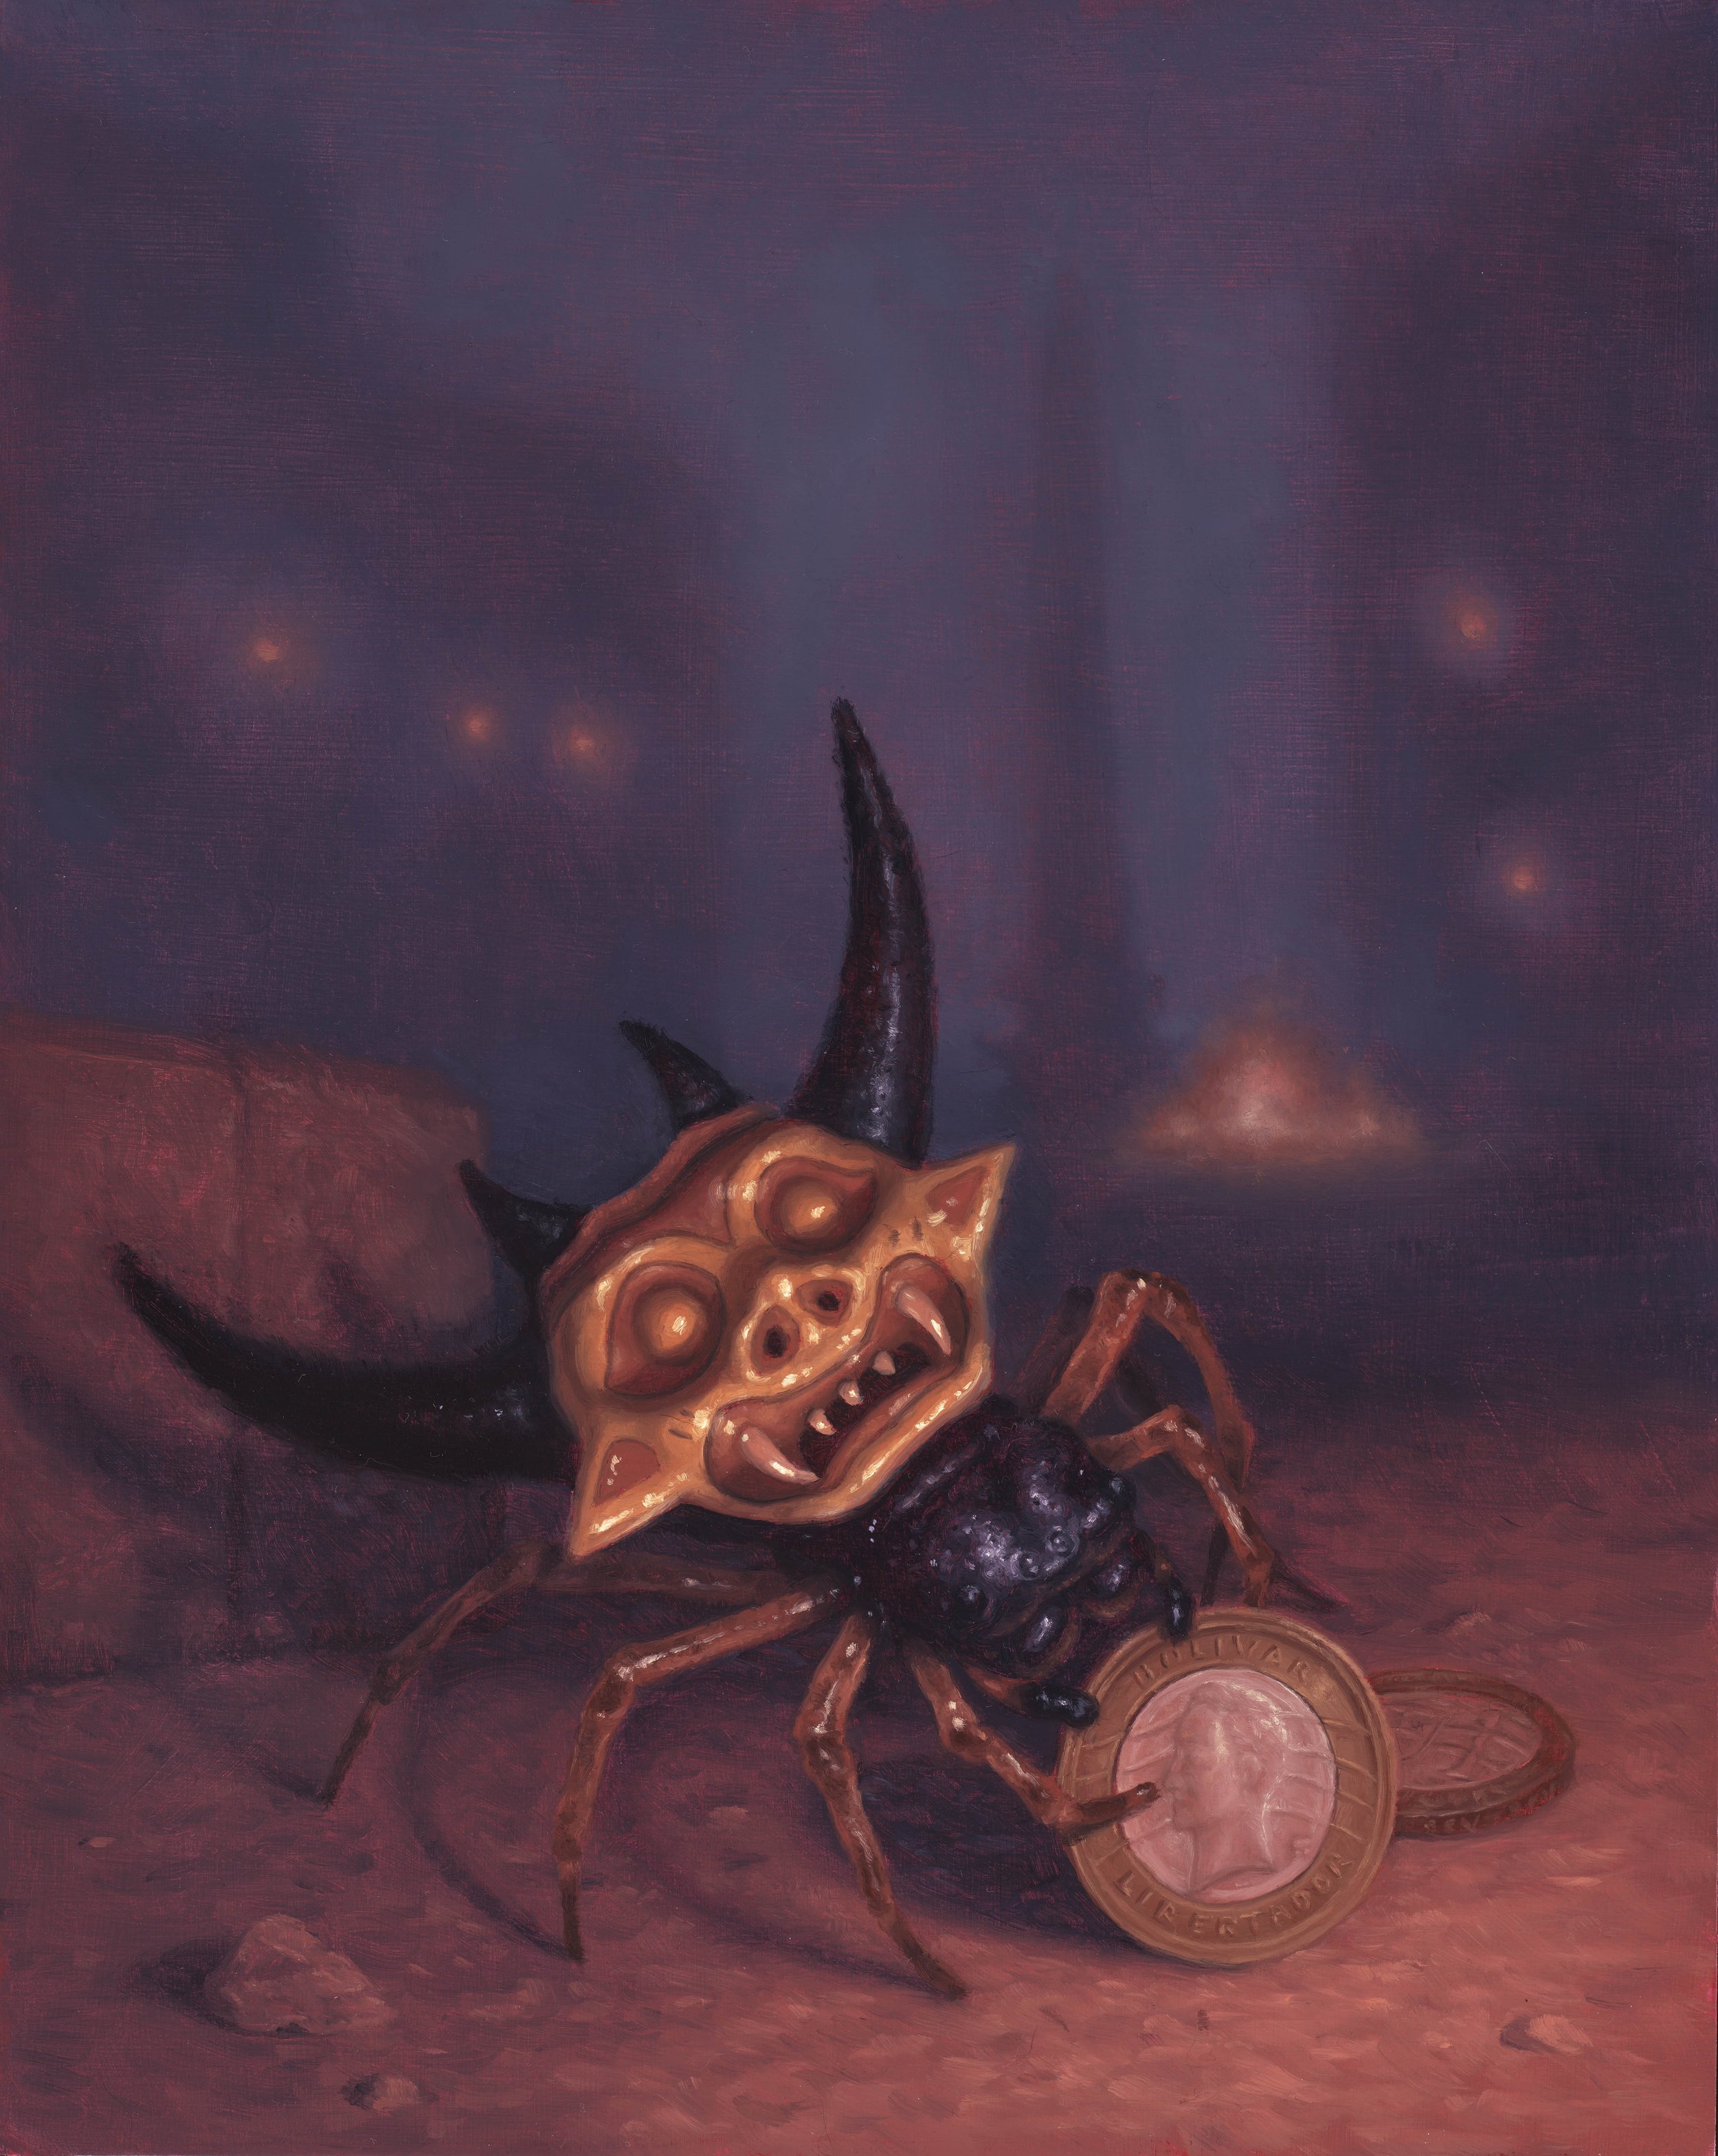  Araña/Spider, 10 x 8 inches, oil on panel, 2022 